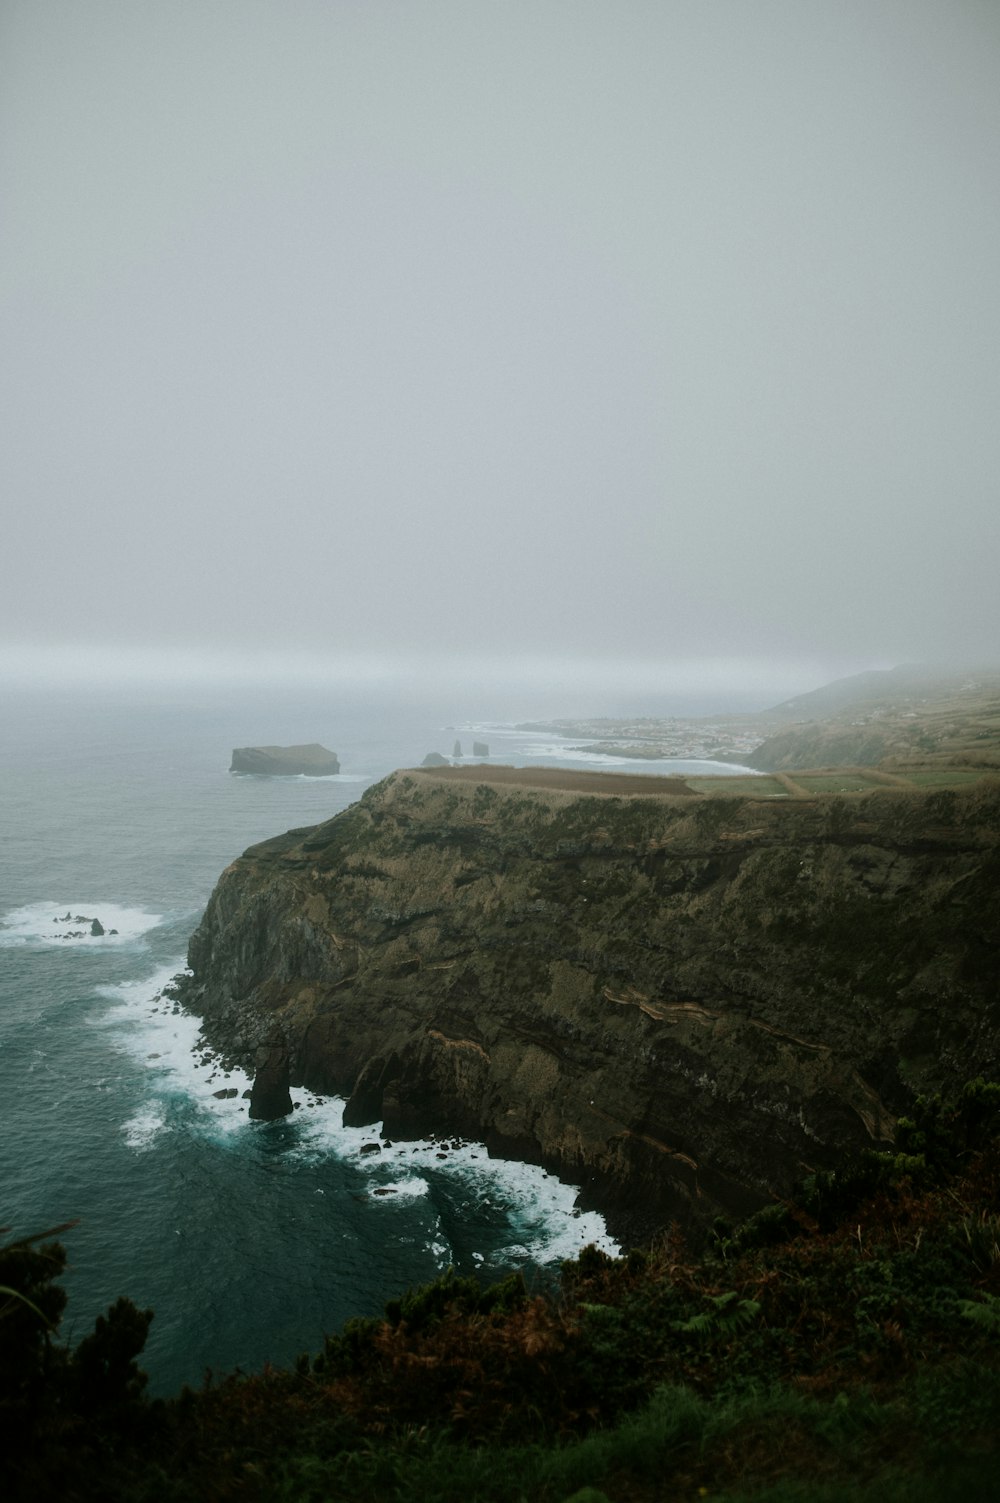 a foggy day on the coast of a large body of water